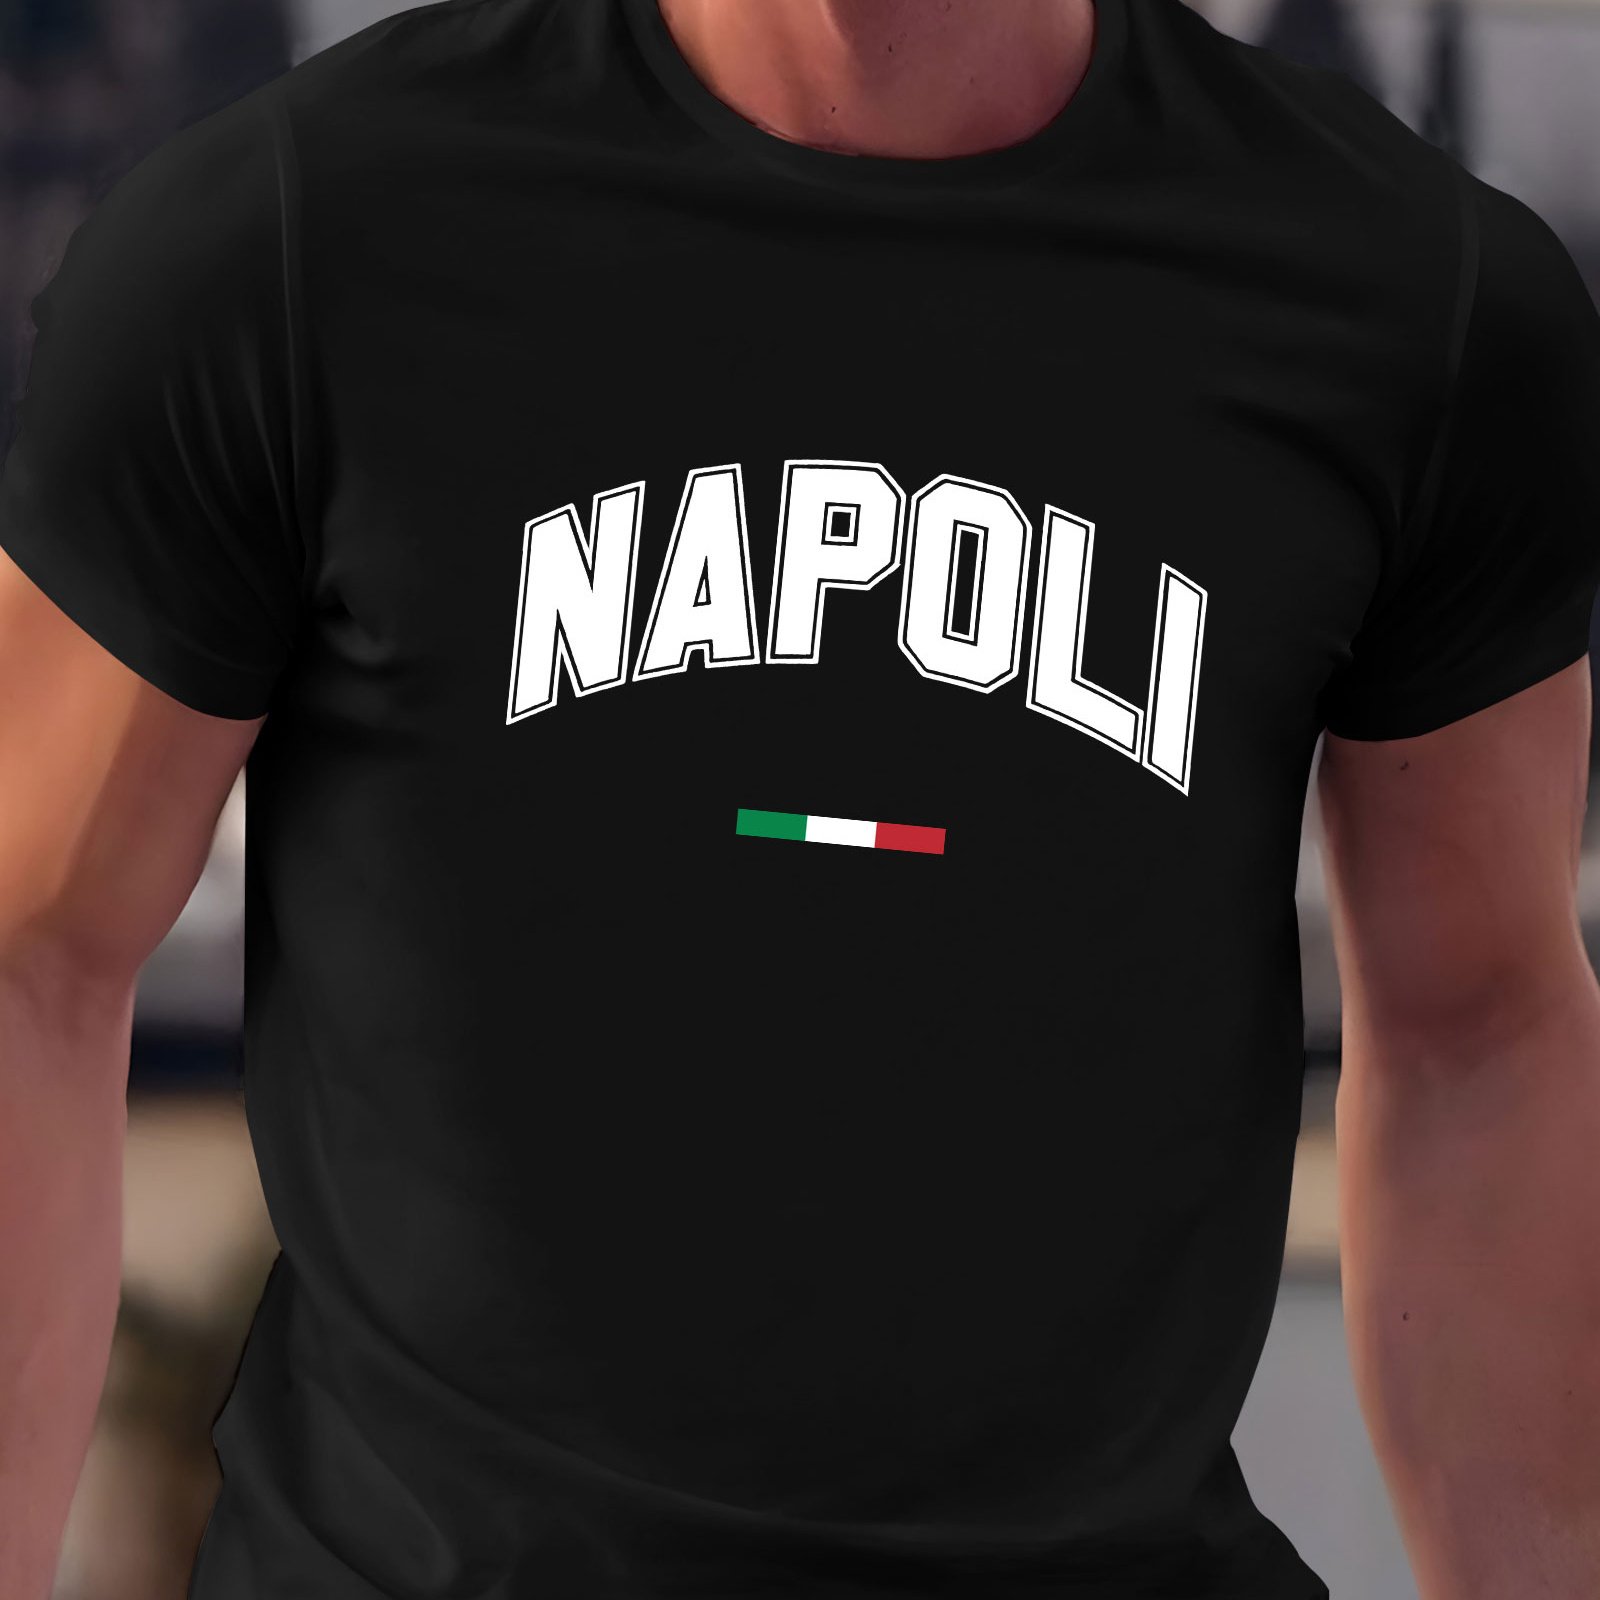 

Napoli Letter Print Men's Crew Neck Short Sleeve T-shirt, Trendy Tees, Casual Comfortable Versatile Top For Summer, Outdoor Sports